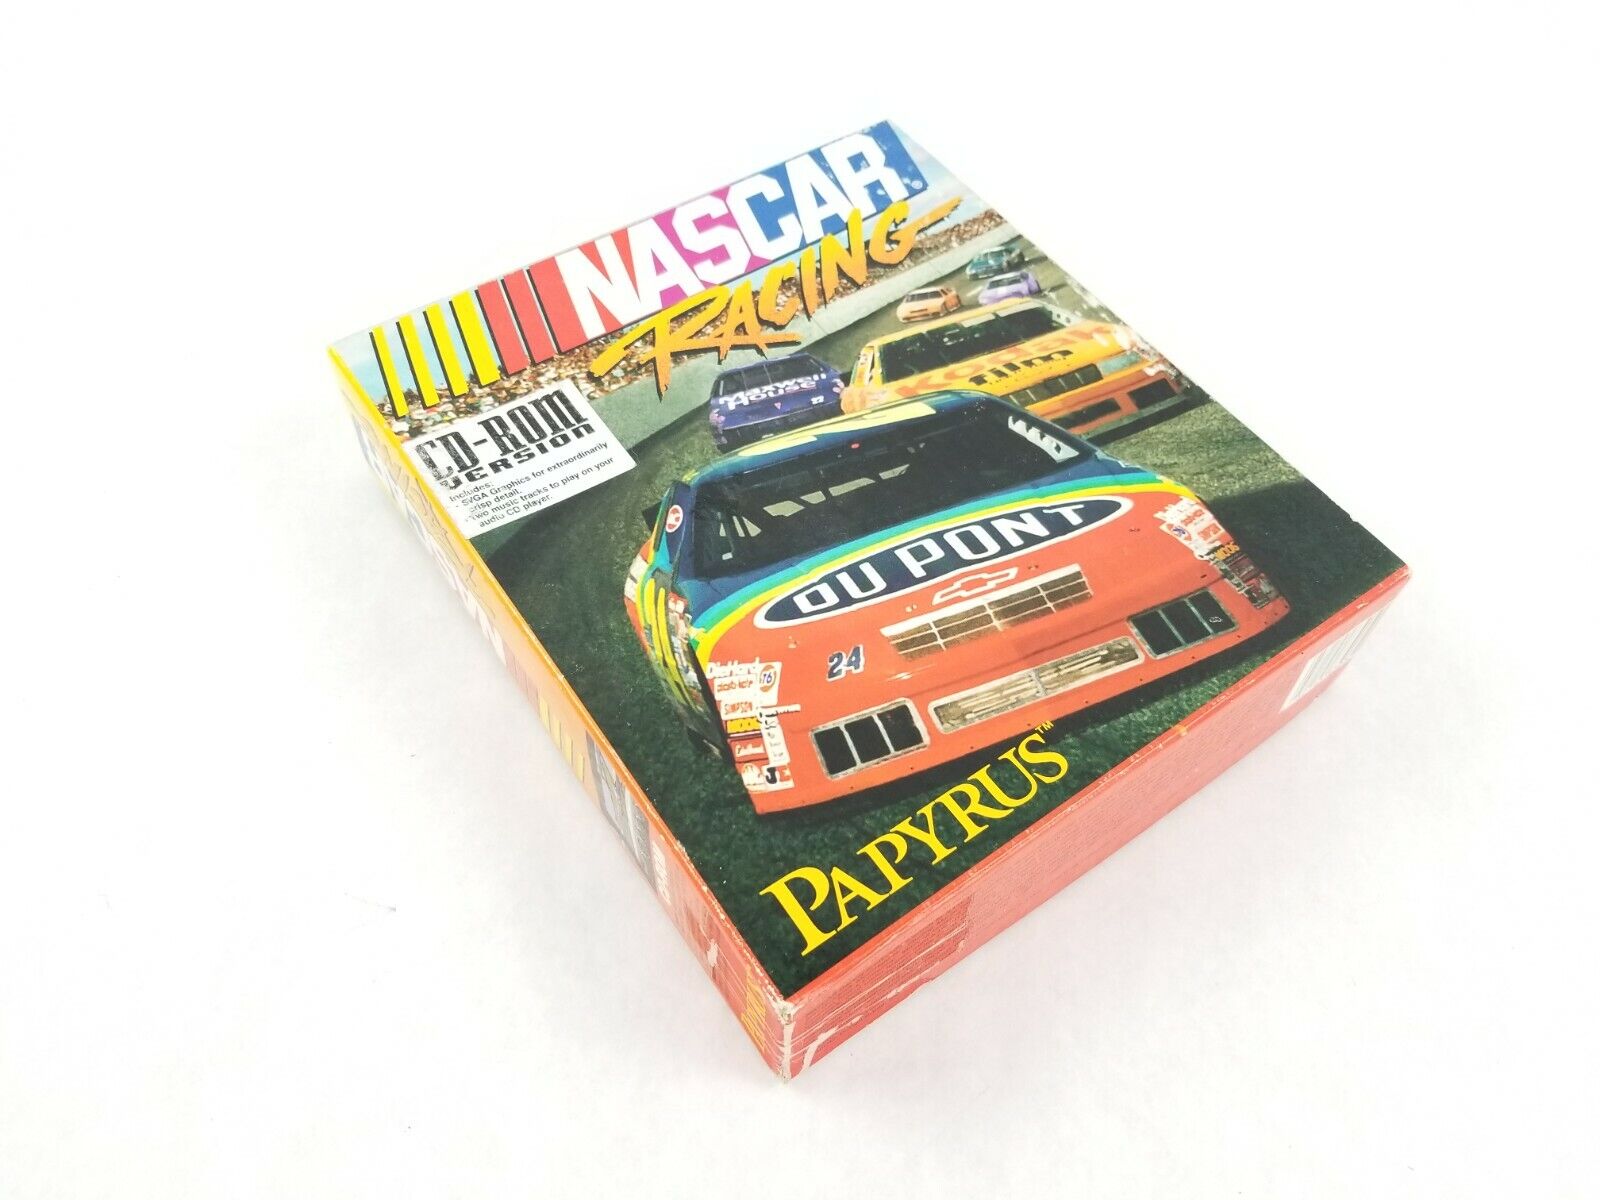 NASCAR Racing (Papyrus, 1994) - PC Windows CD-ROM With Manual and Box